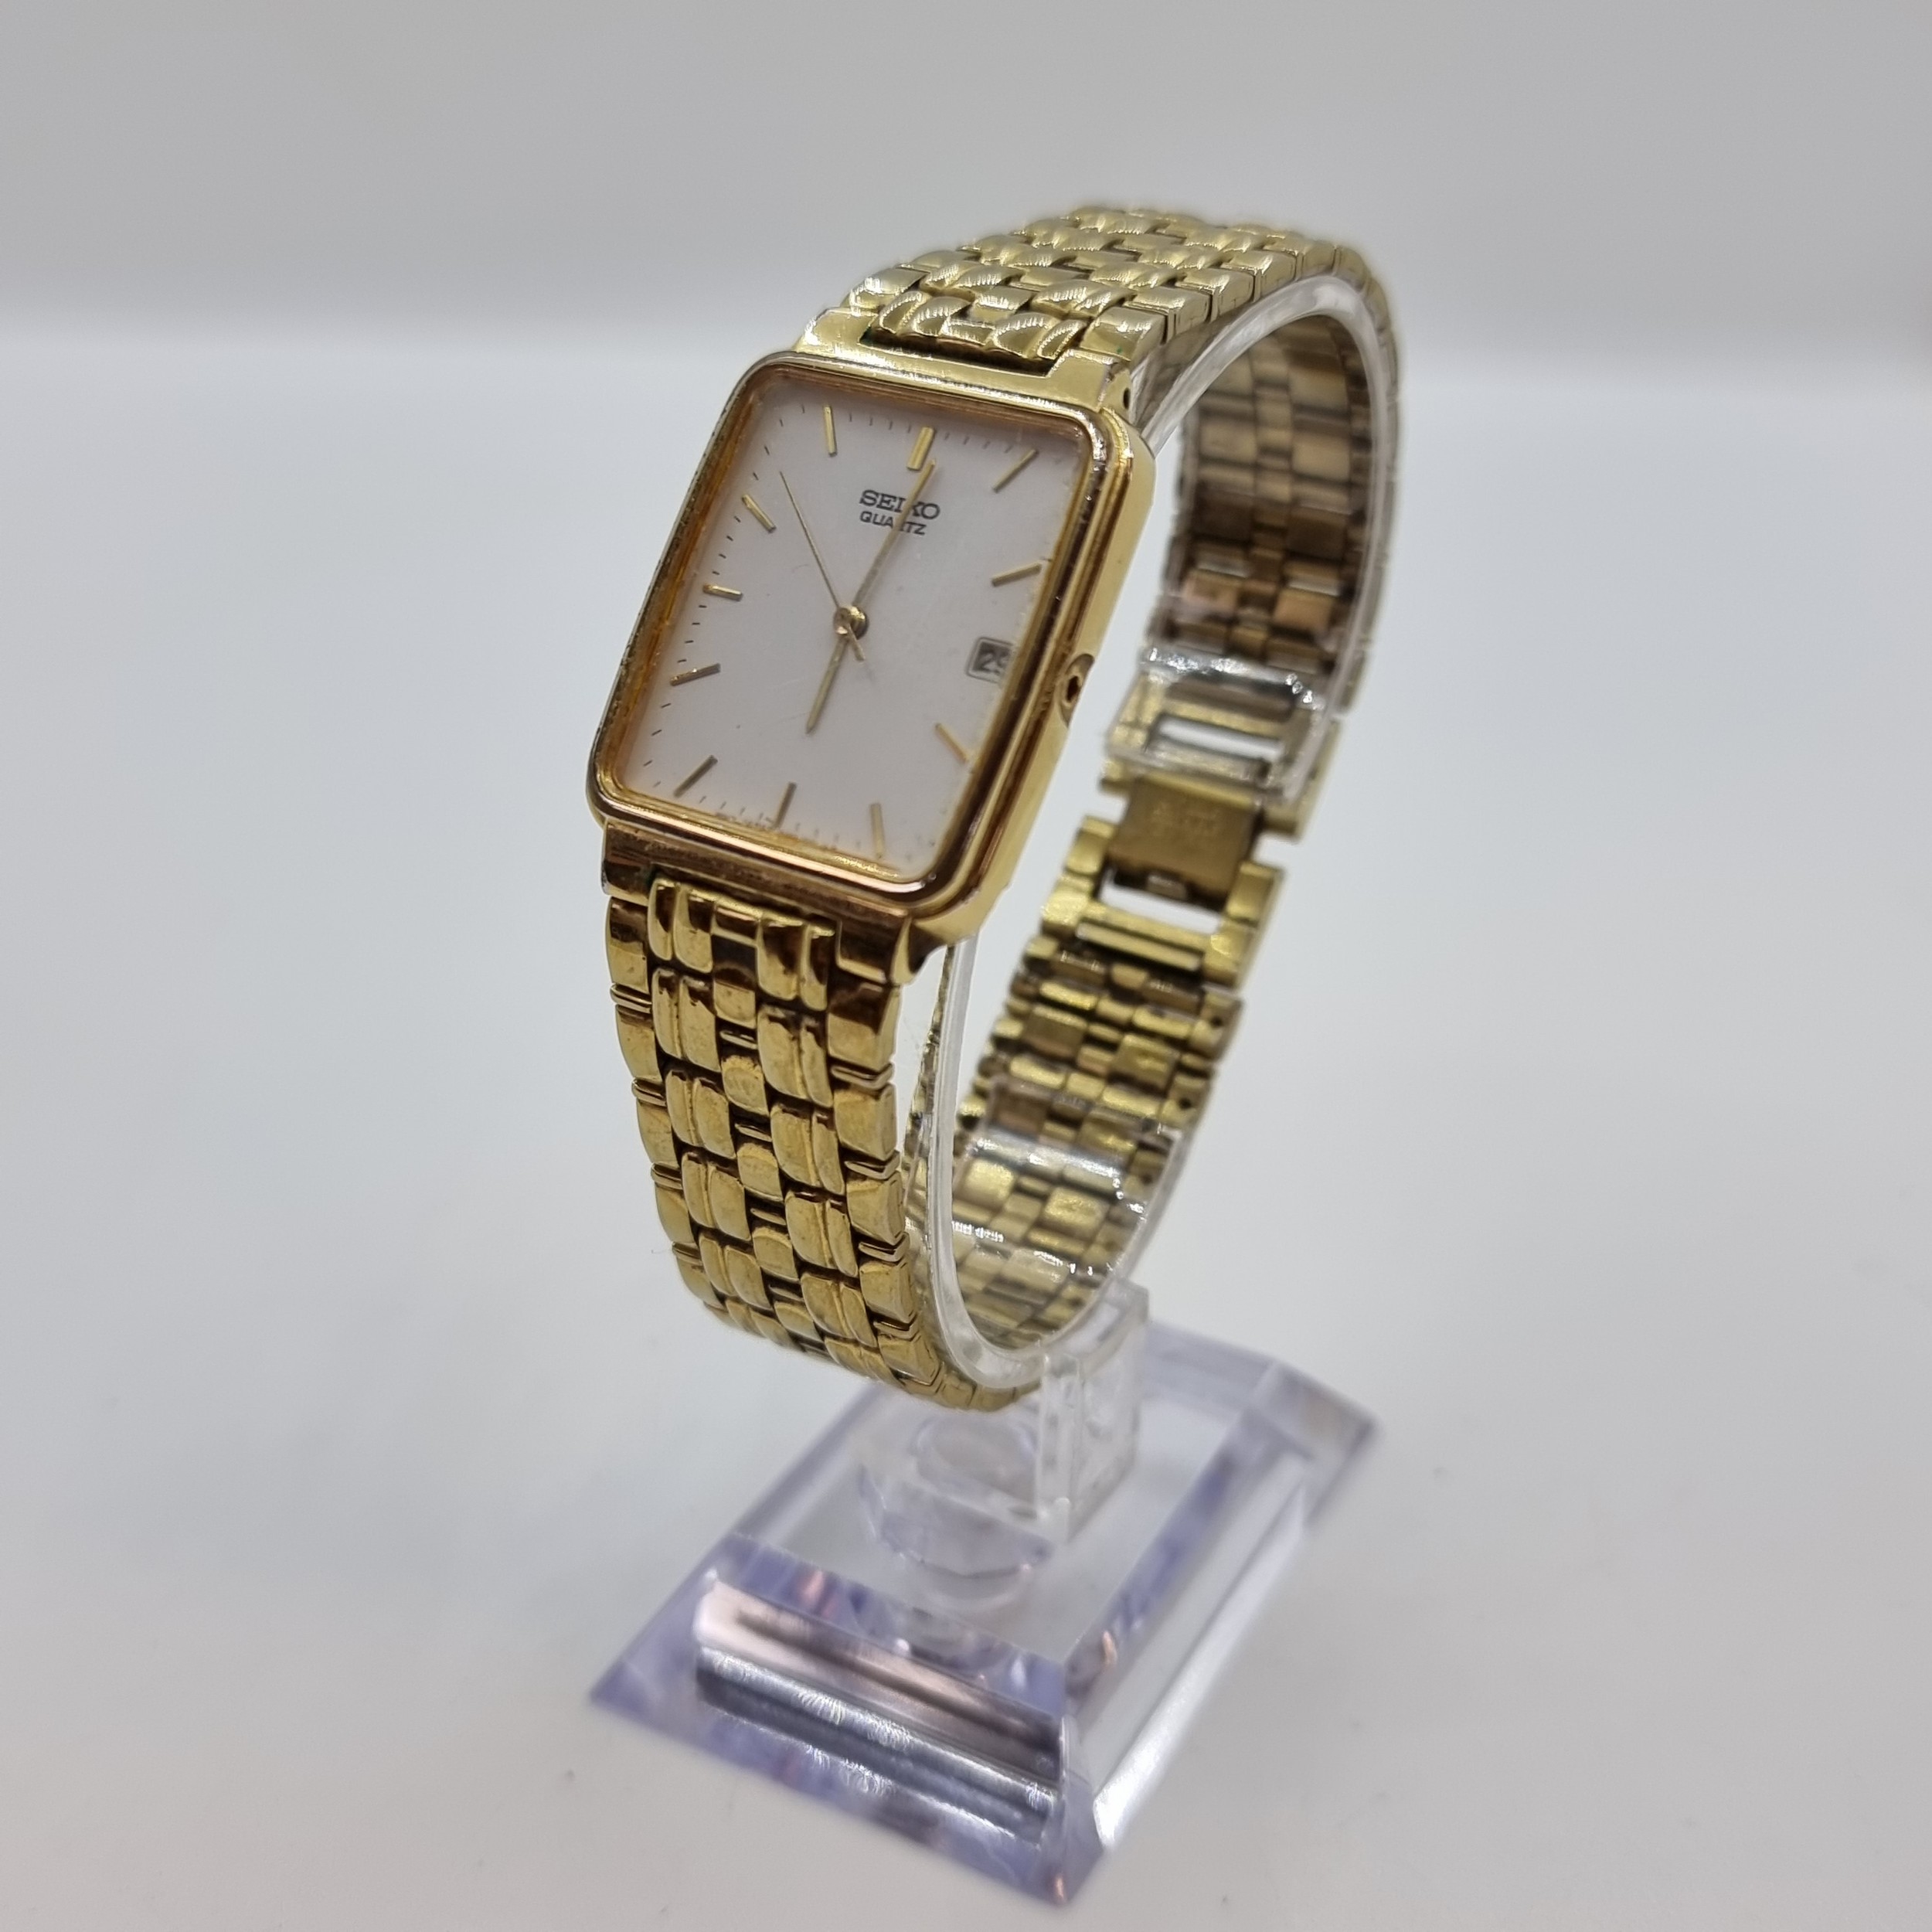 Men's Seiko gold tone stainless steel quartz watch with date and white  face. Model 7N22-5091 RO.